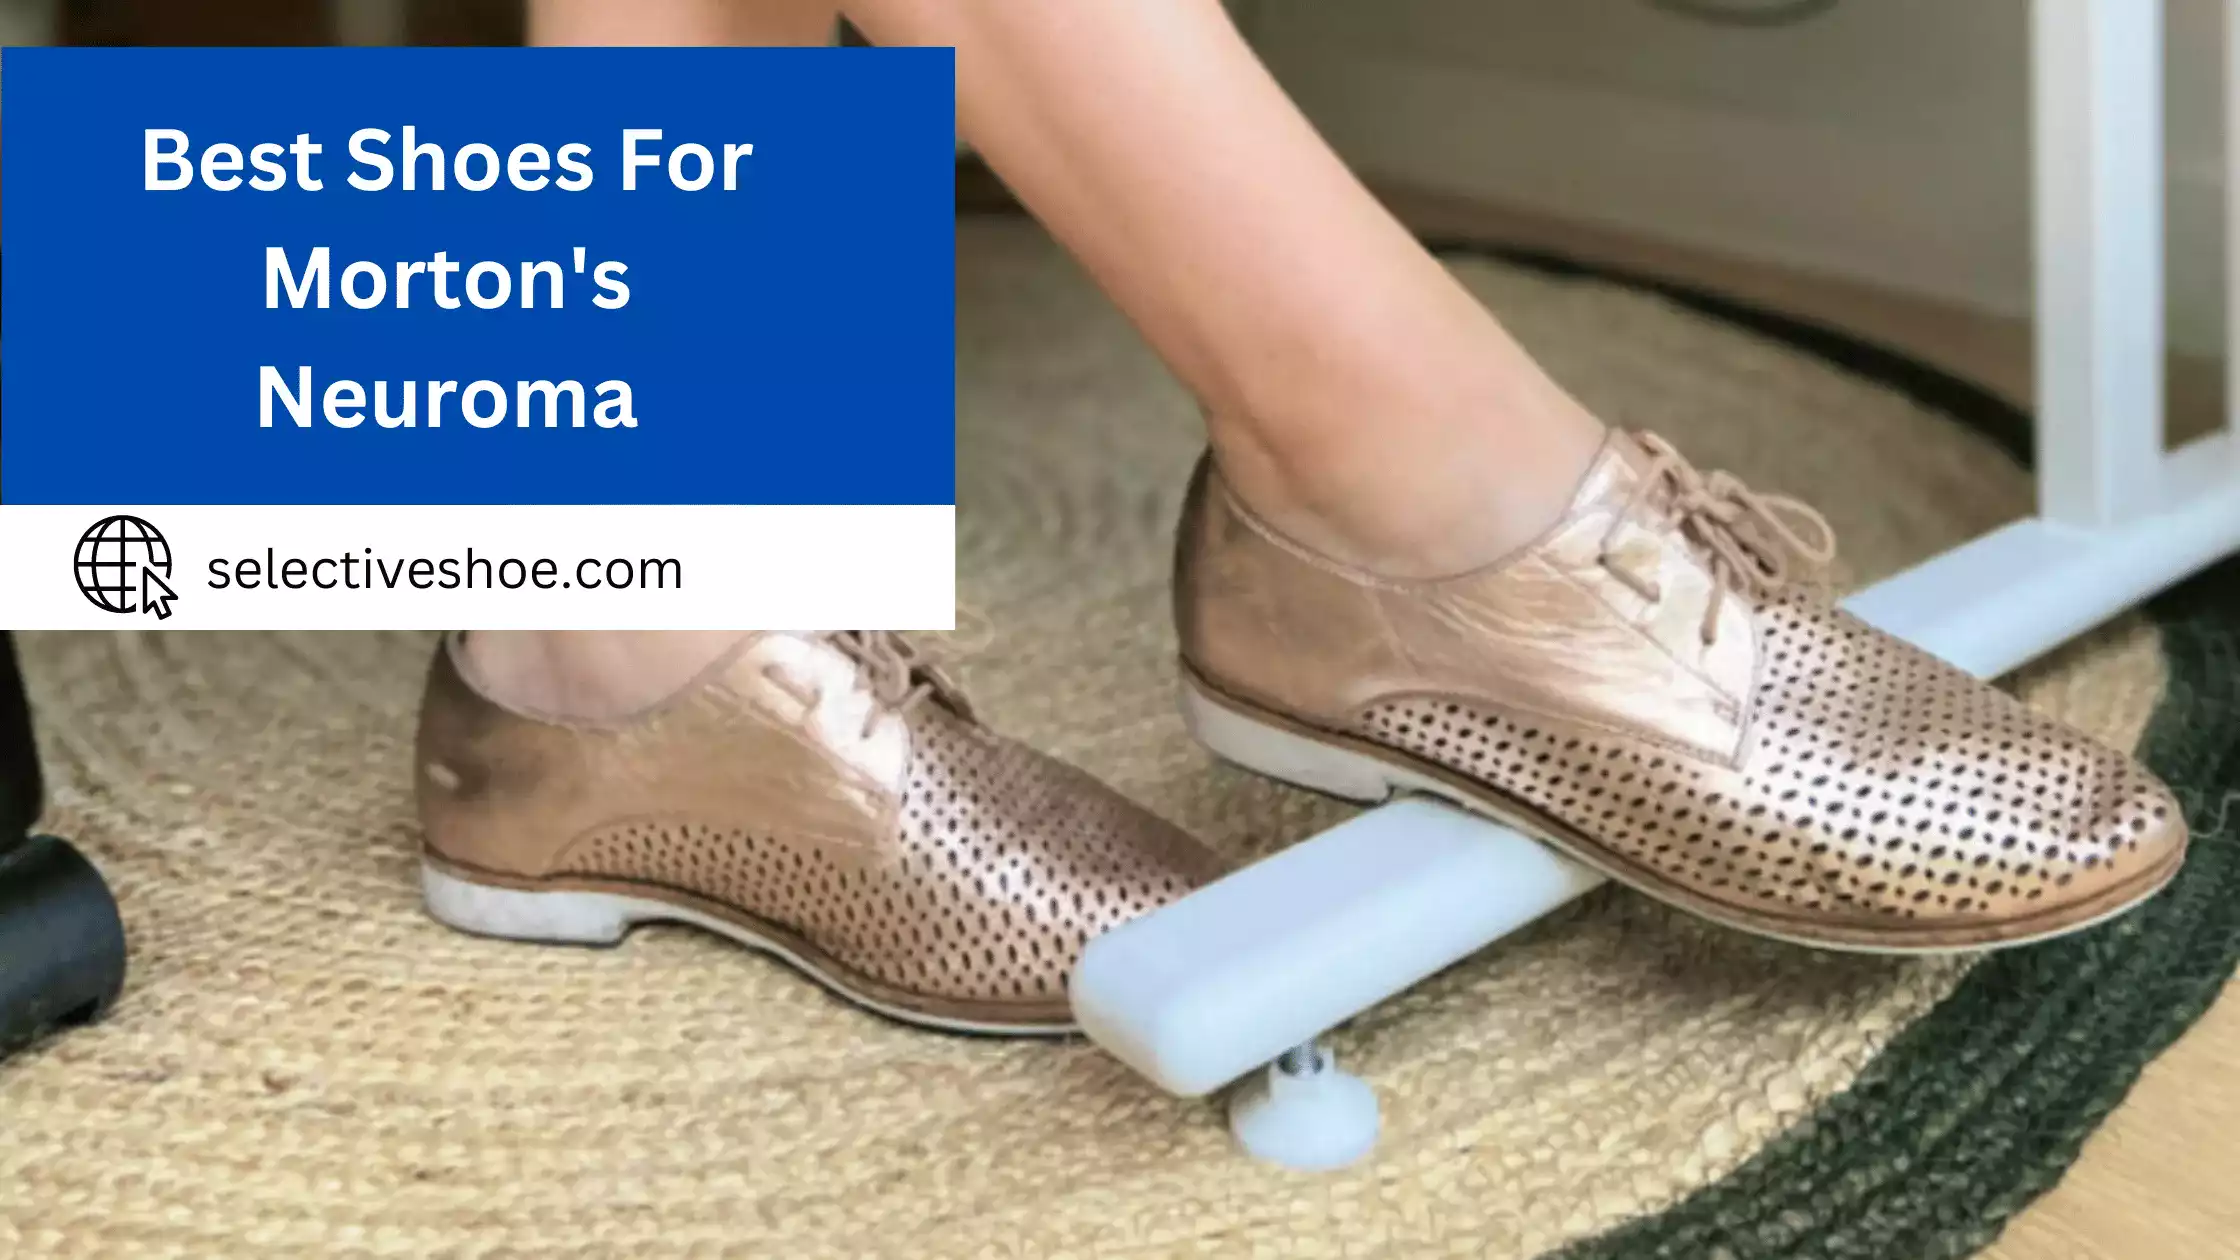 Best Shoes For Morton's Neuroma - Expert Choice